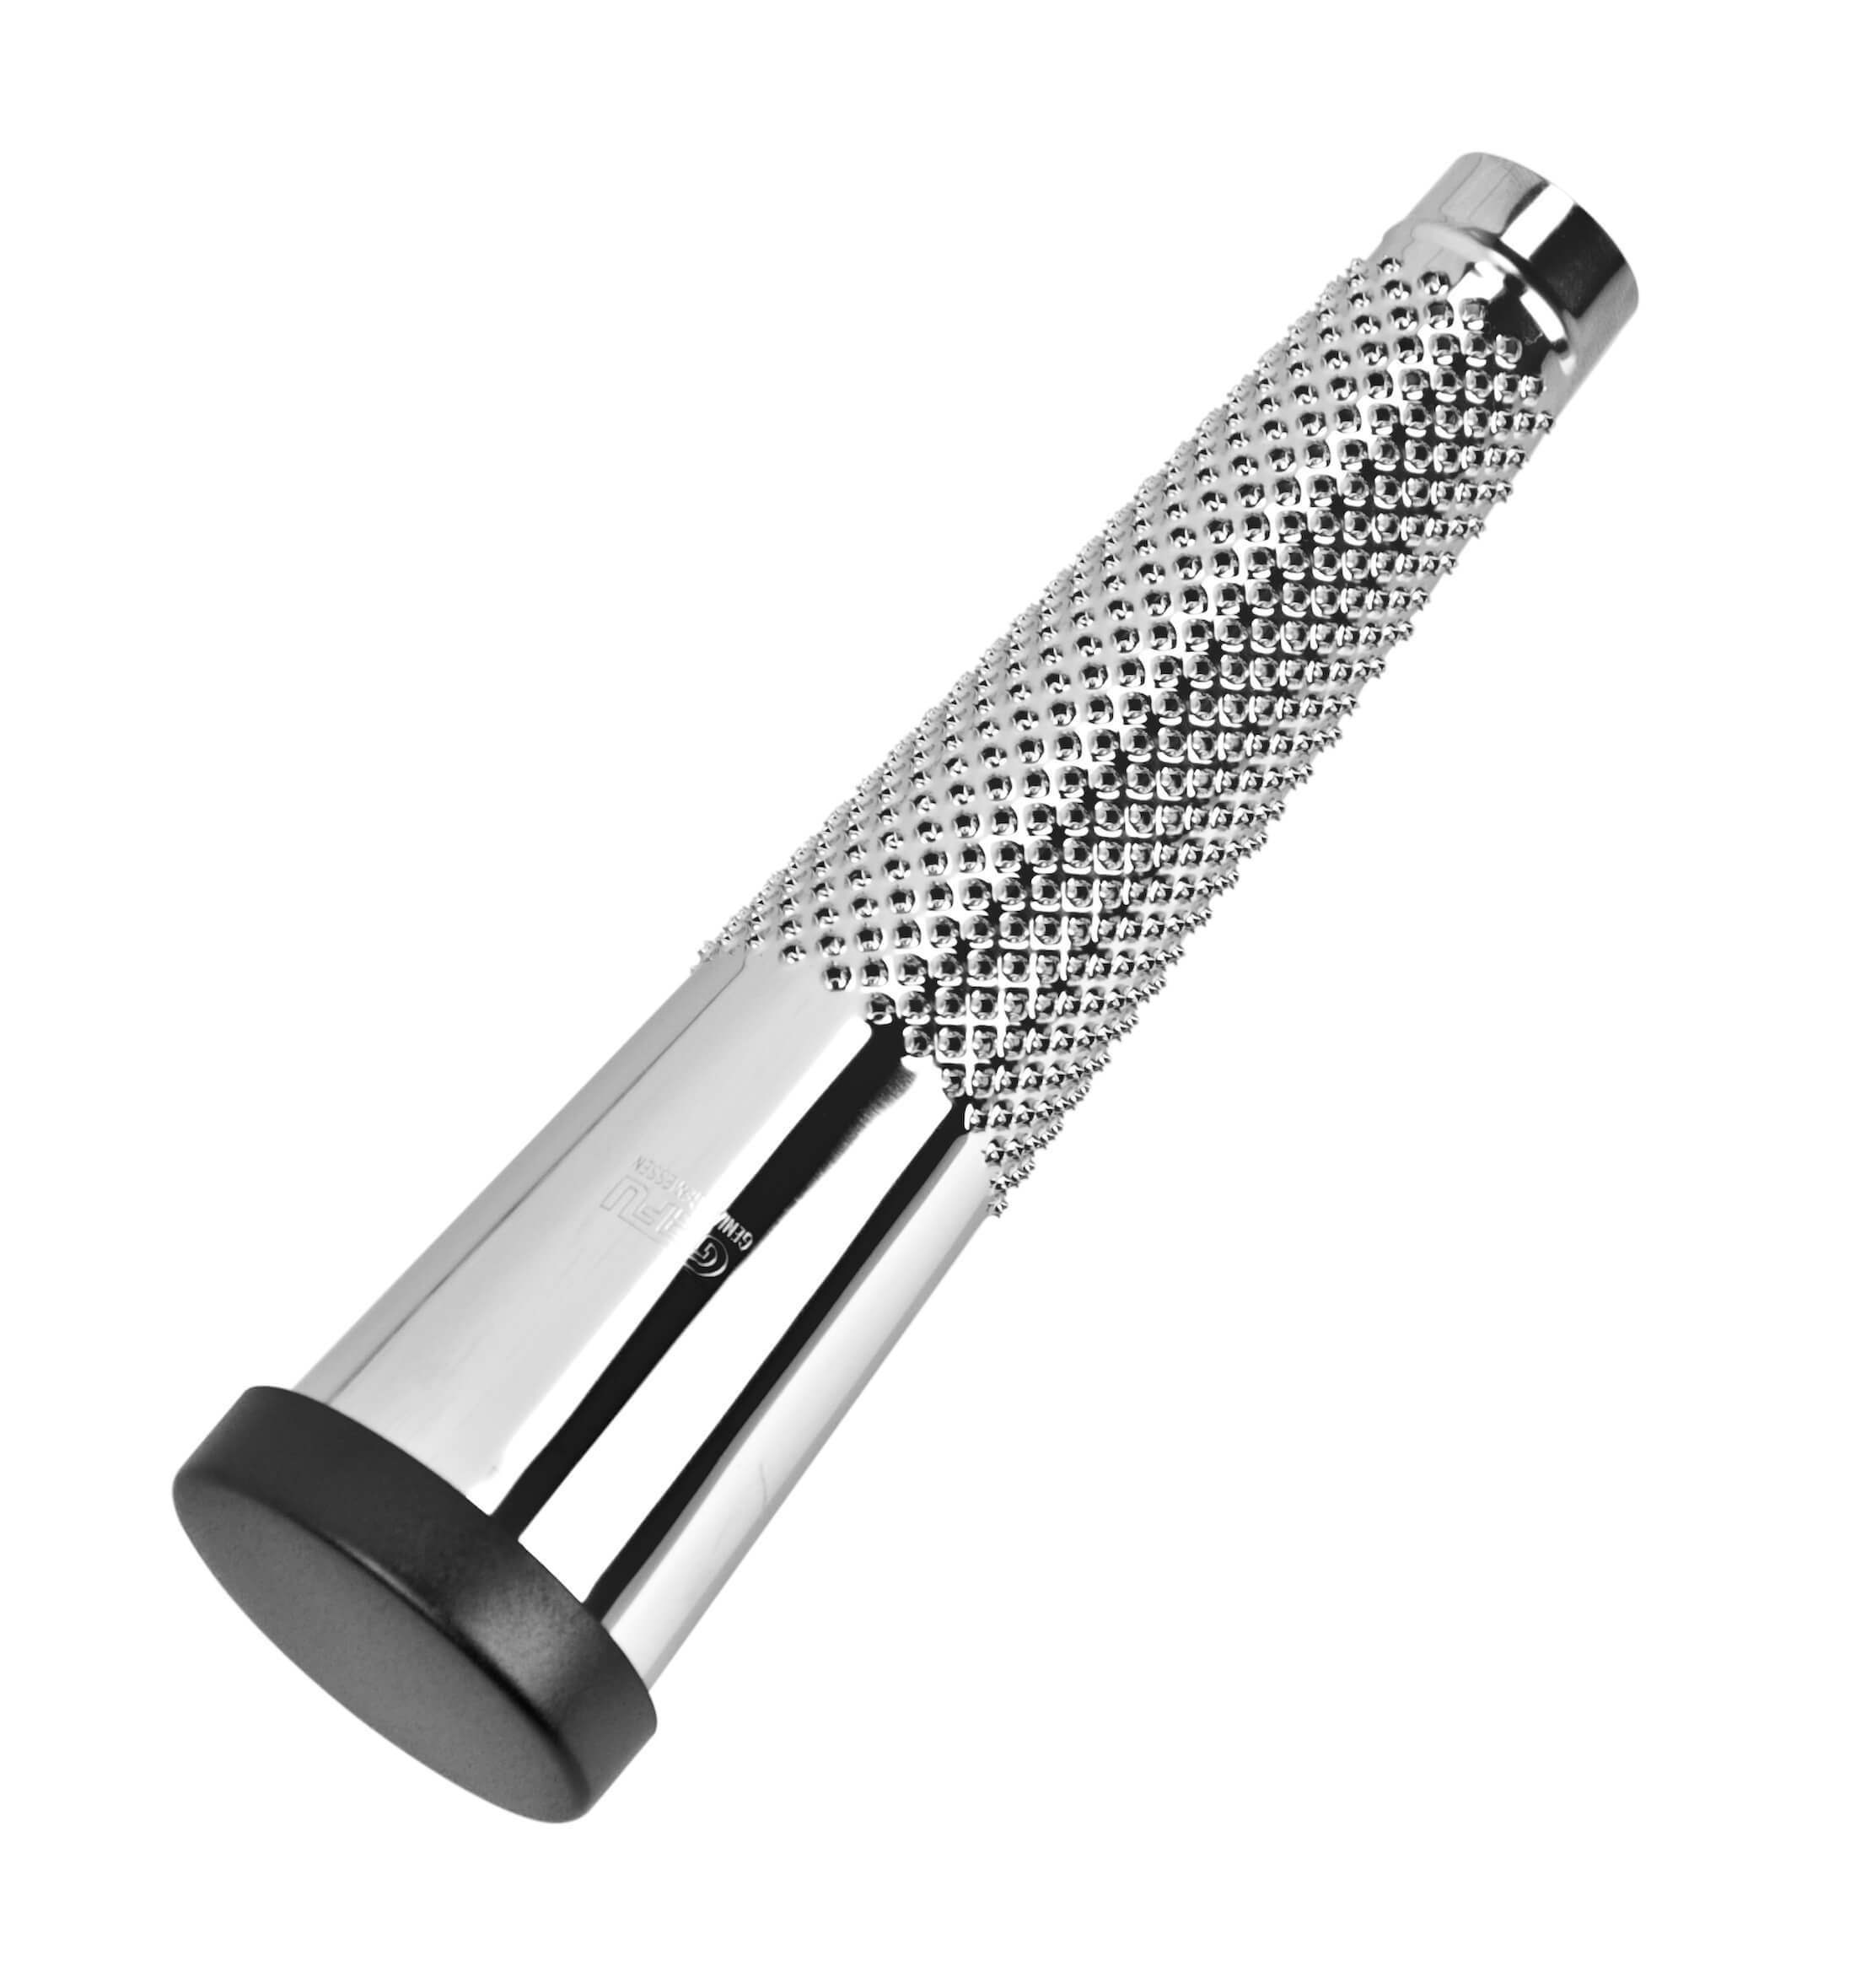 Nutmeg grater with storage compartment - stainless steel polished